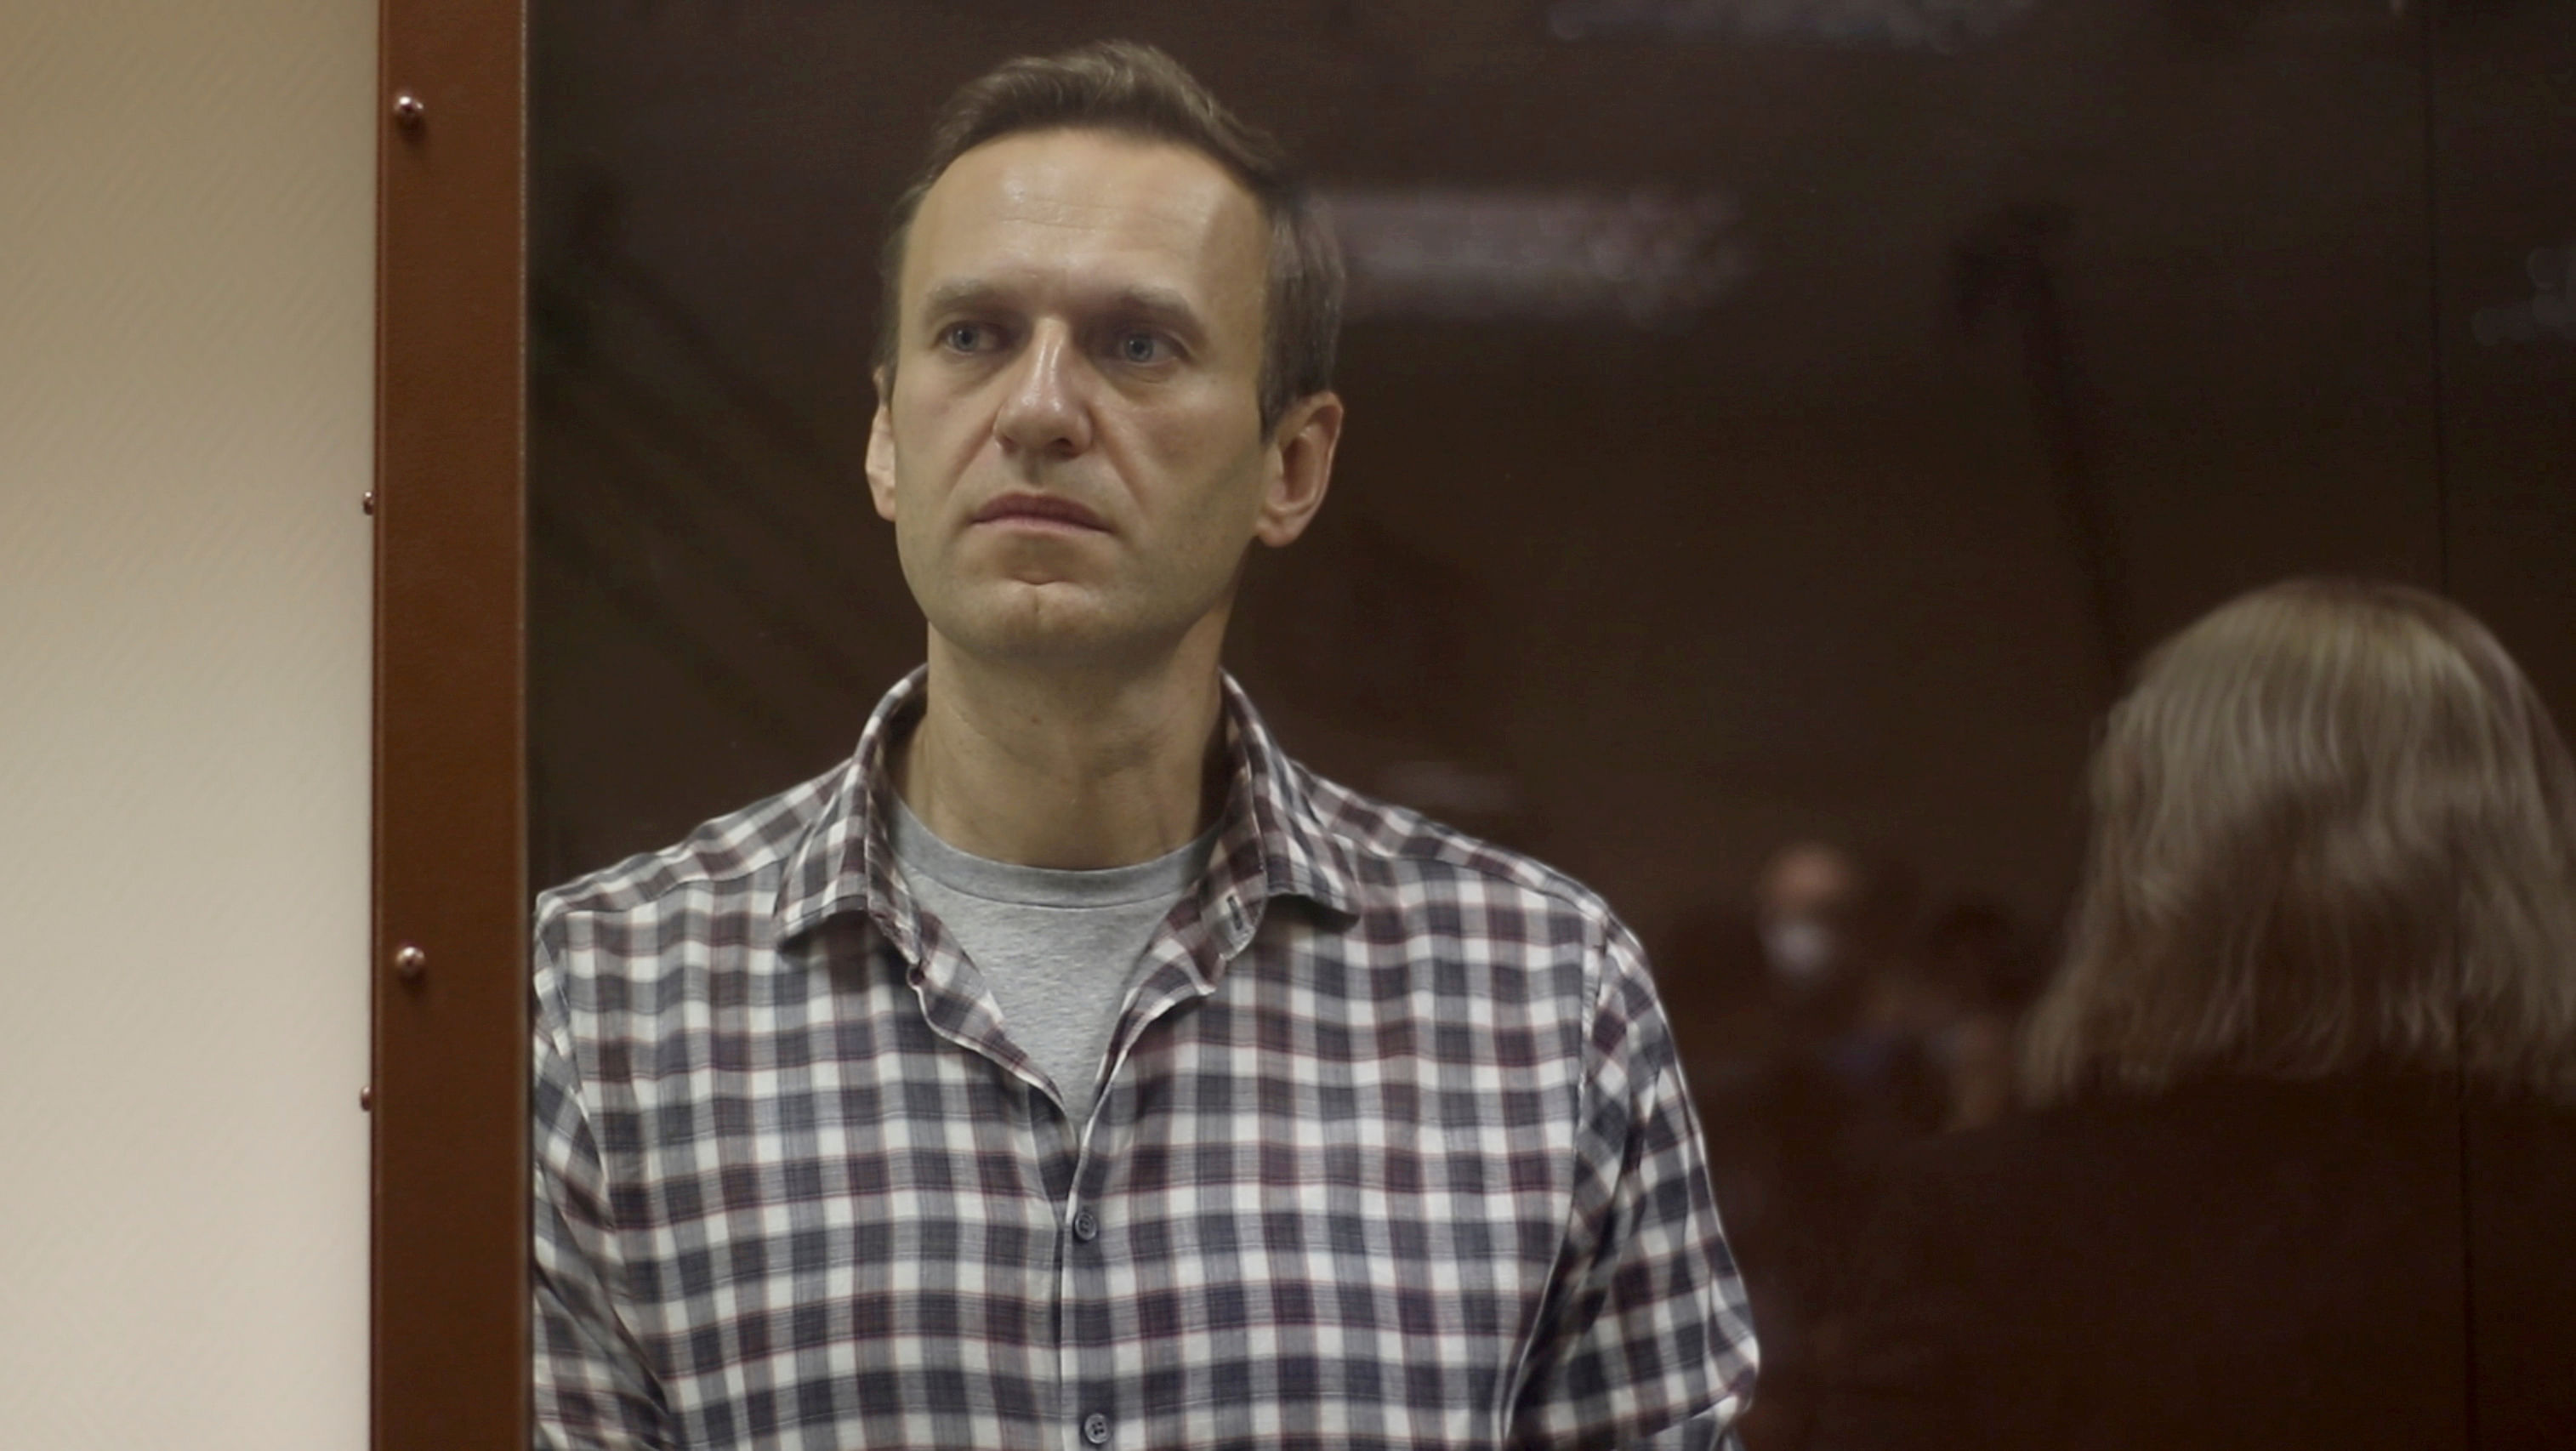 Kremlin critic Alexei Navalny stands inside a defendant dock during a court hearing in Moscow, Russia, Russia February 20, 2021, in this still image taken from video. Credit: Babushkinsky District Court of Moscow/Handout via REUTERS